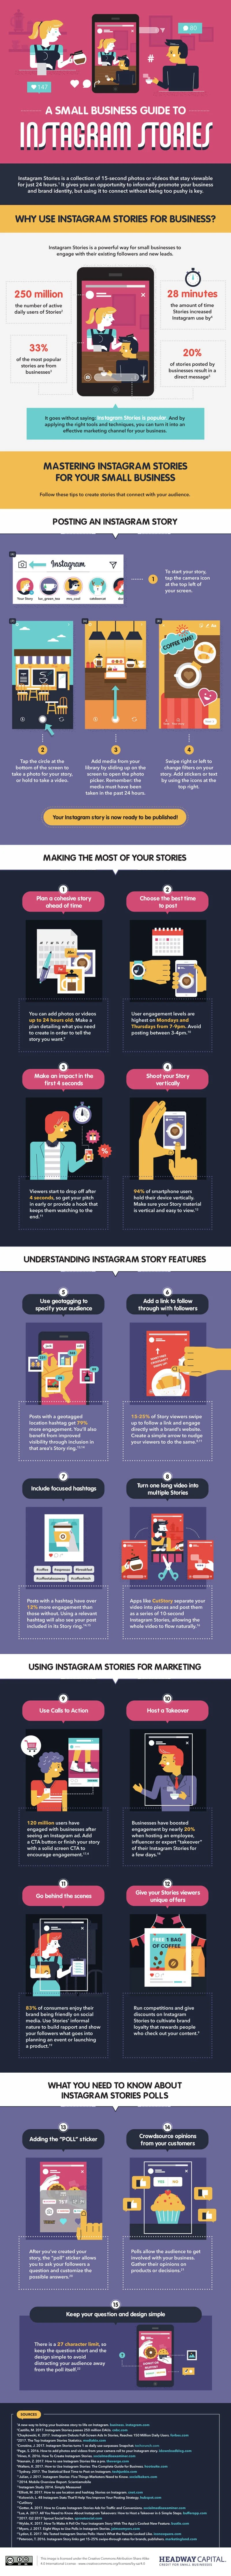 A Small Business Guide to Instagram Stories - #infographic